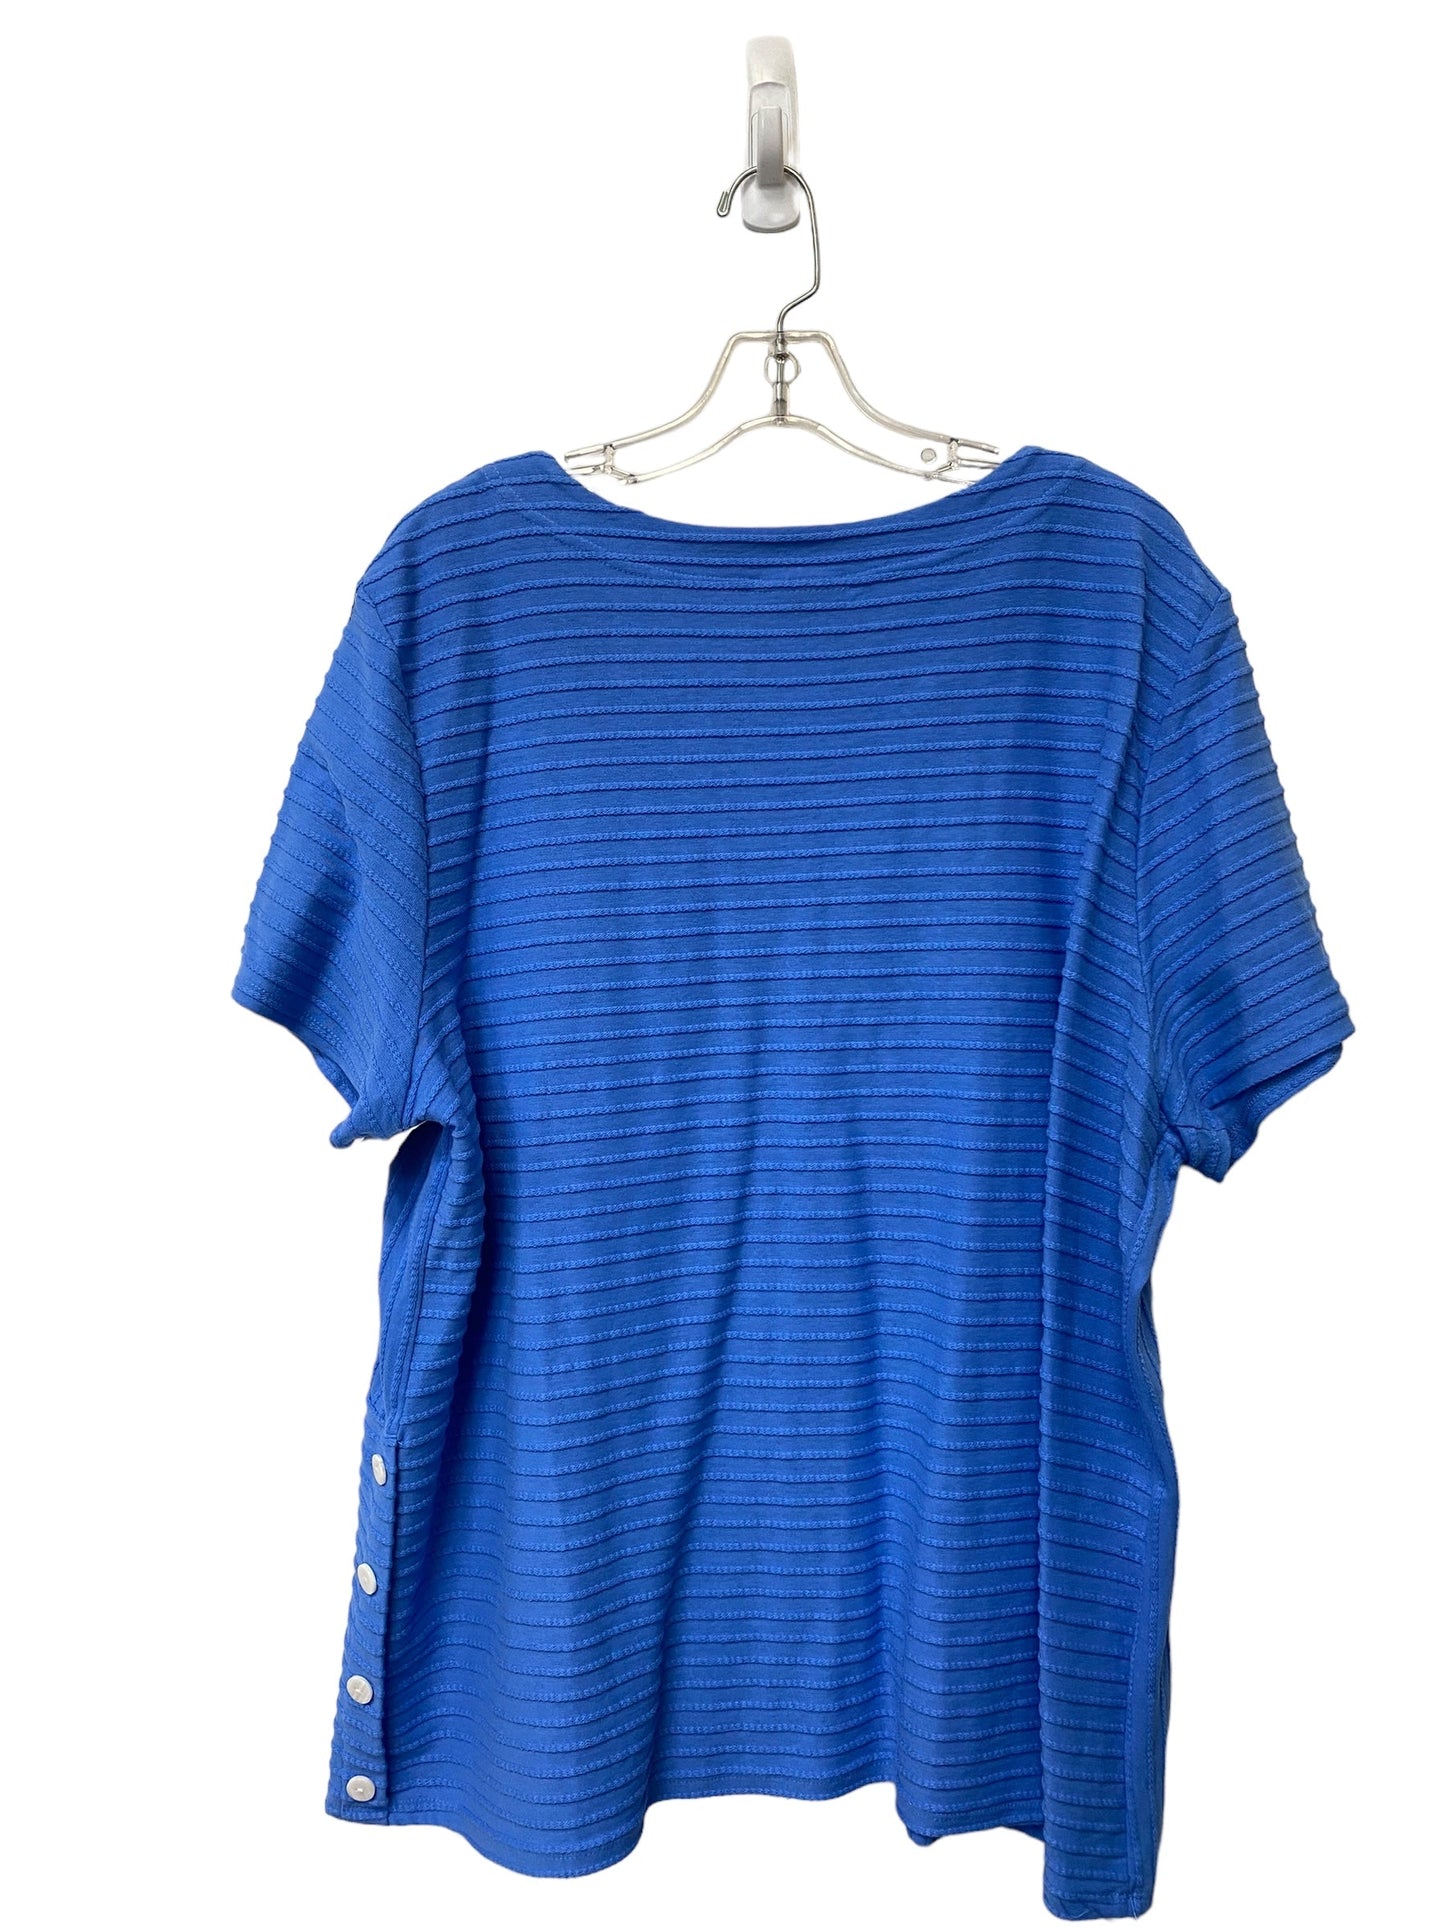 Blue Top Short Sleeve Alfred Dunner, Size 2x